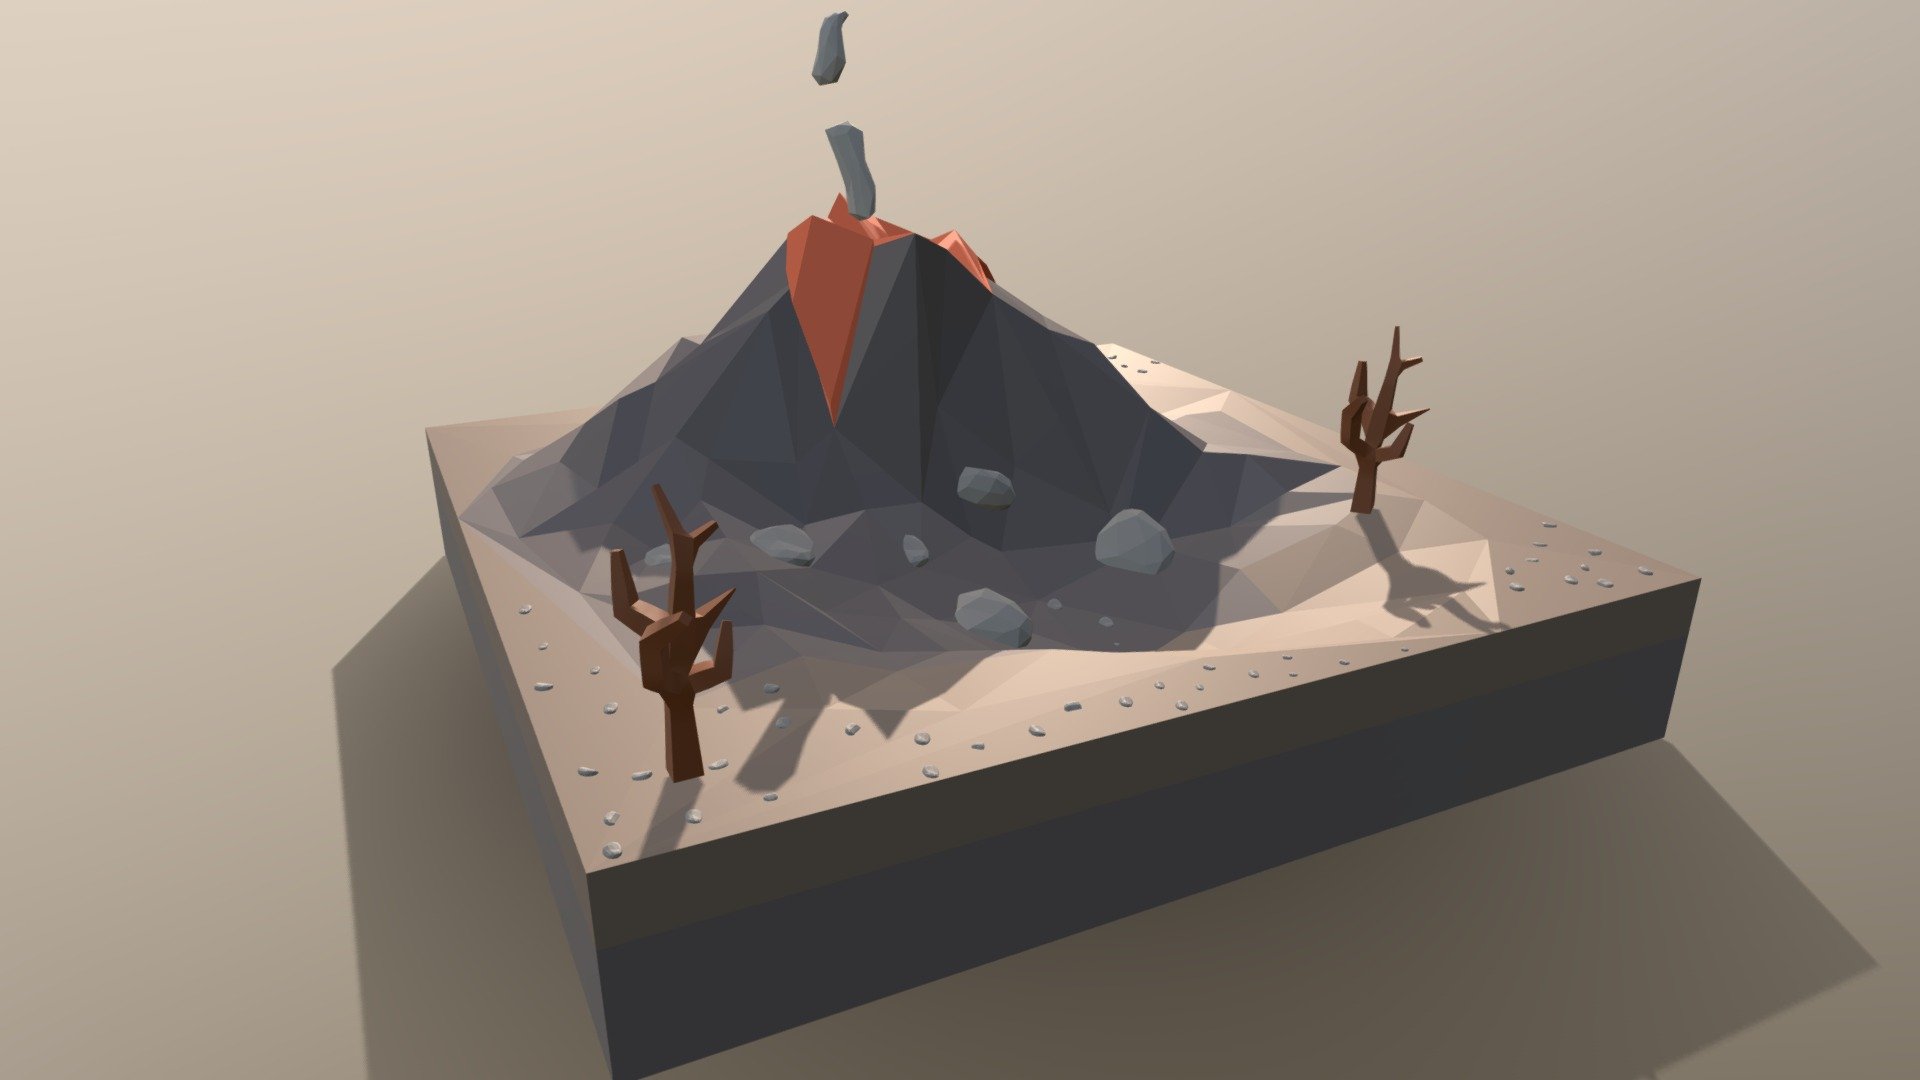 This is a low poly 3d model of a volcano scen. The low poly volcano was modeled and prepared for low-poly style renderings, background, general CG visualization.

The 3d vocano model is presented as a 4 meshes with quads/tris.

Meshes : Volcano Smoke Trees Rocks

Verts : 3.312 Faces: 5.867

Simple diffuse colors.

No ring, maps and no UVW mapping is available.

The original file was created in blender. You will receive a 3DS, OBJ, FBX, blend, DAE, Stl.

All preview images were rendered with Blender Cycles. Product is ready to render out-of-the-box. Please note that the lights, cameras, and background is only included in the .blend file. The model is clean and alone in the other provided files, centered at origin and has real-world scale - Low Poly Cartoon Volcano Scene - Buy Royalty Free 3D model by chroma3d (@vendol21) 3d model